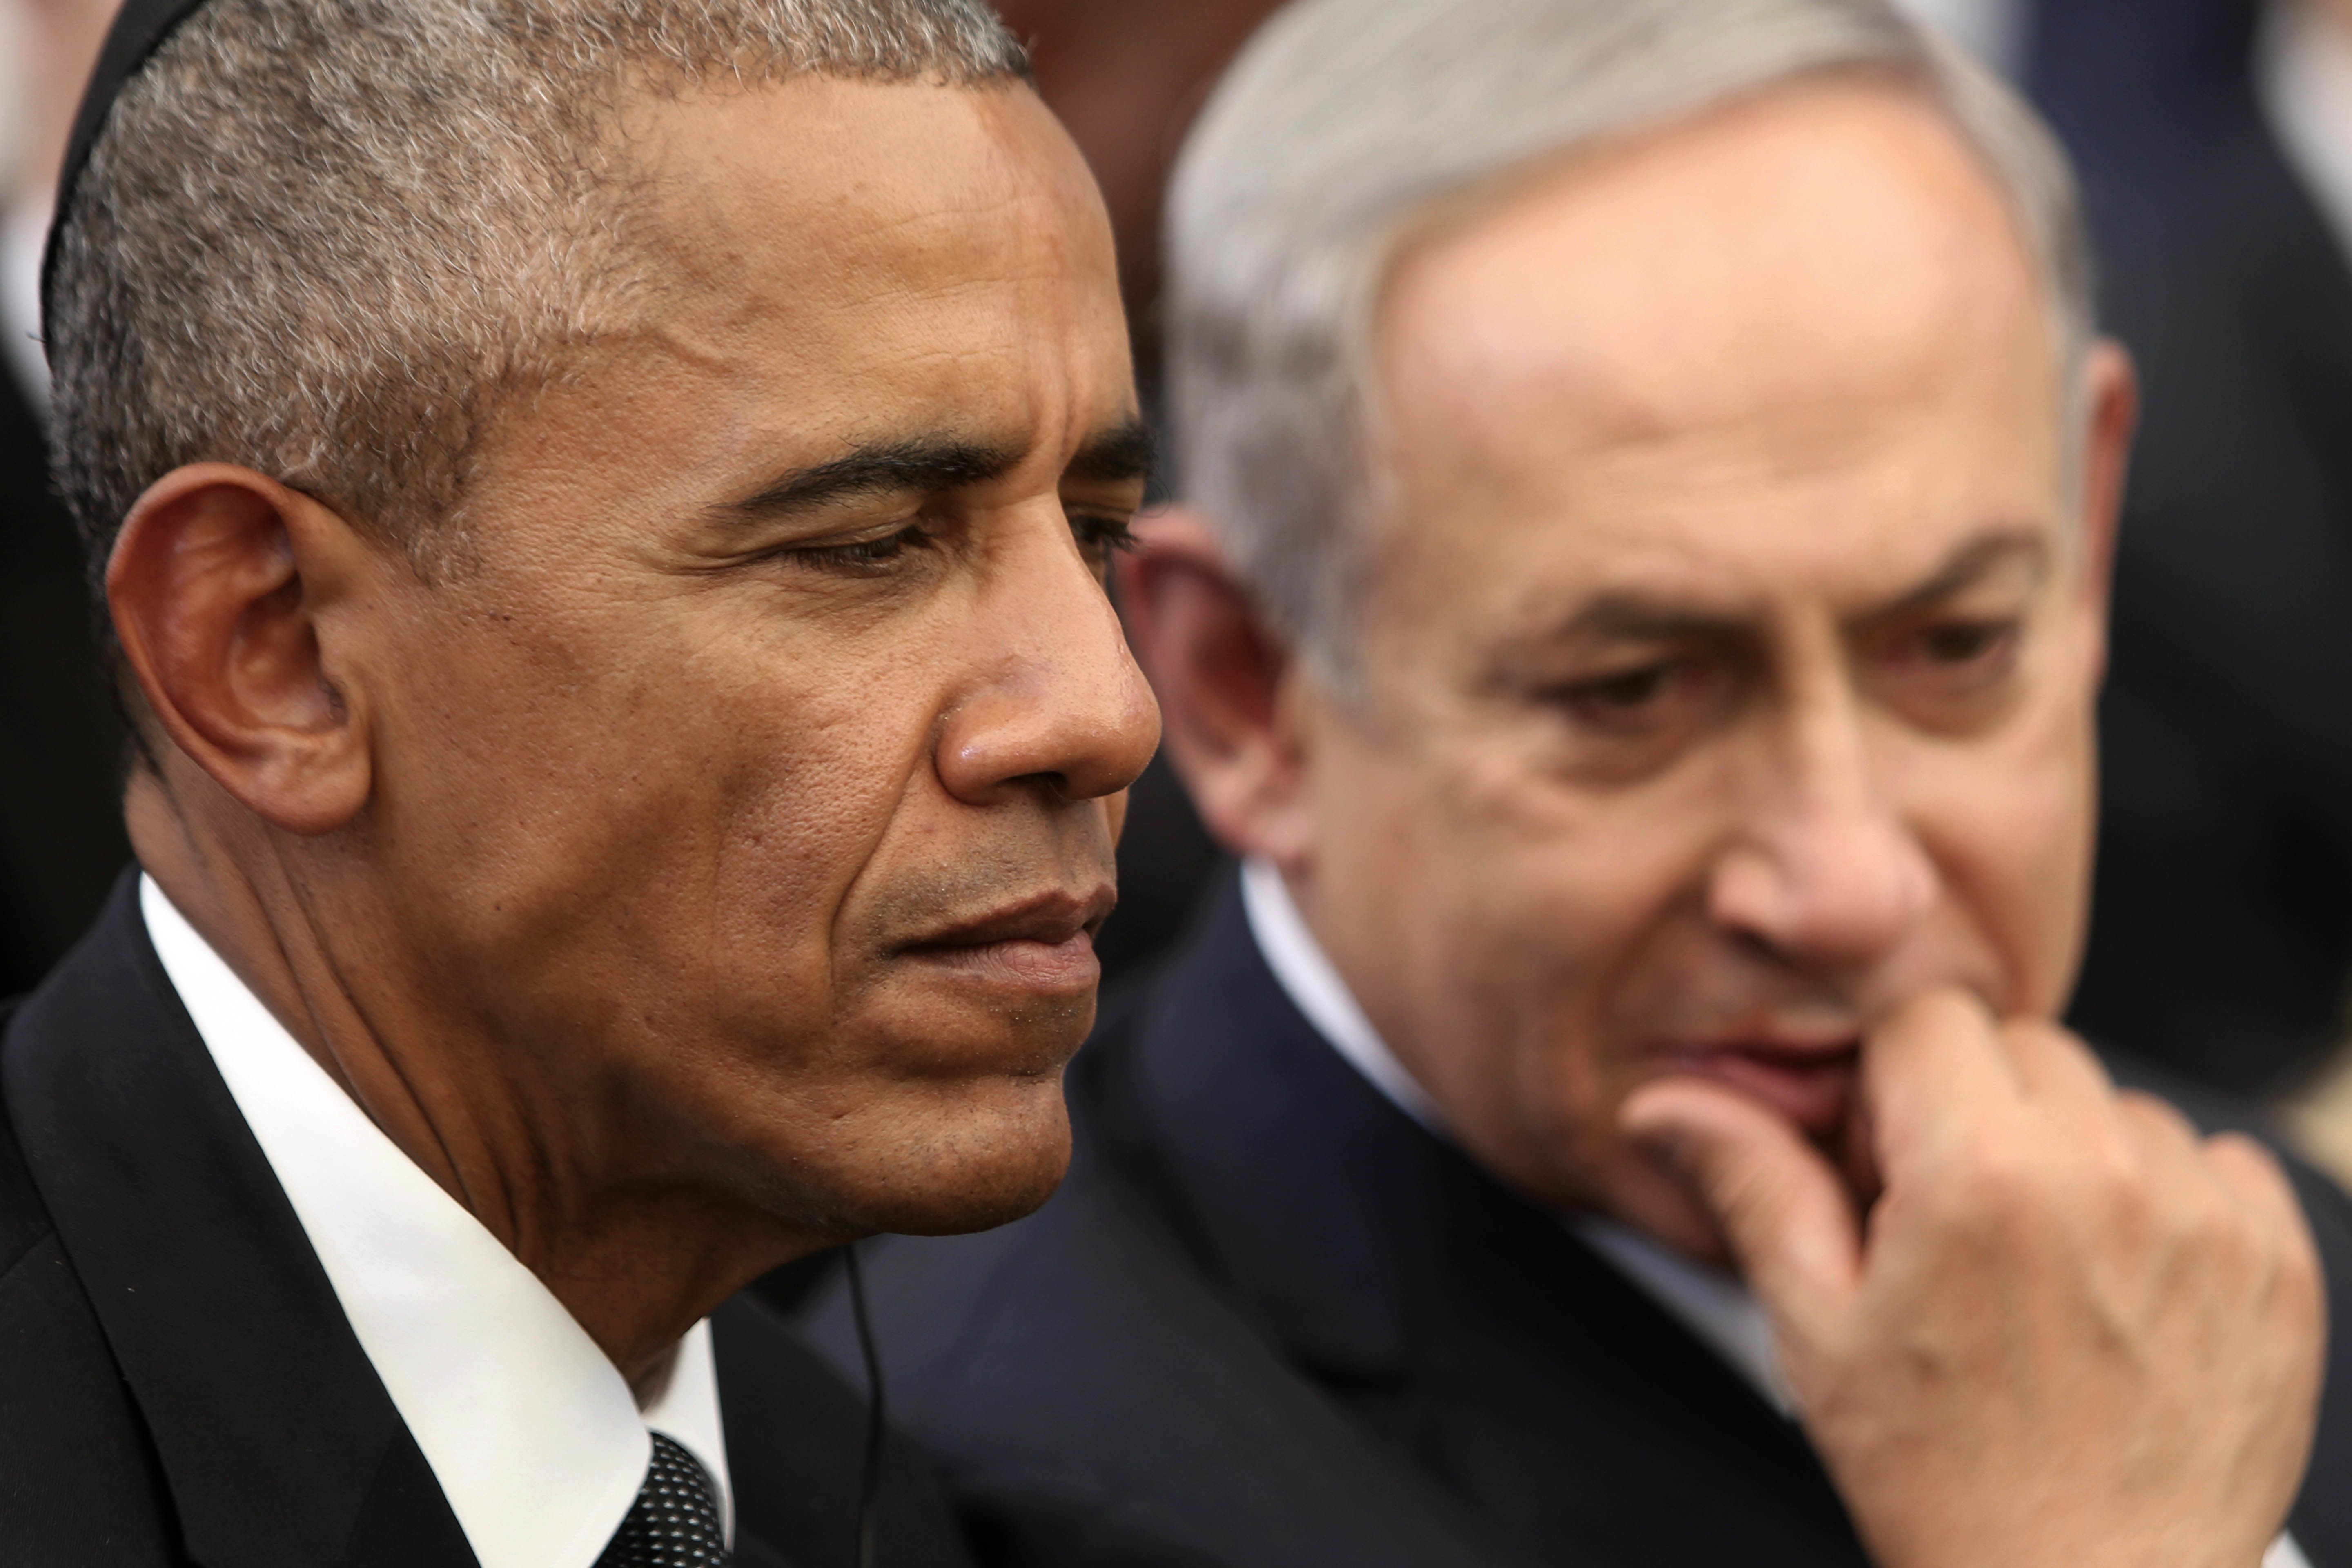 President Barack Obama met with Israeli Prime Minister Binjamin Netanyahu in 2016, following ratification of a 10-year agreement by the U.S. to provide Israel $3.8 million annually for military armaments, most of which must be spent with U.S. manufacturers. 